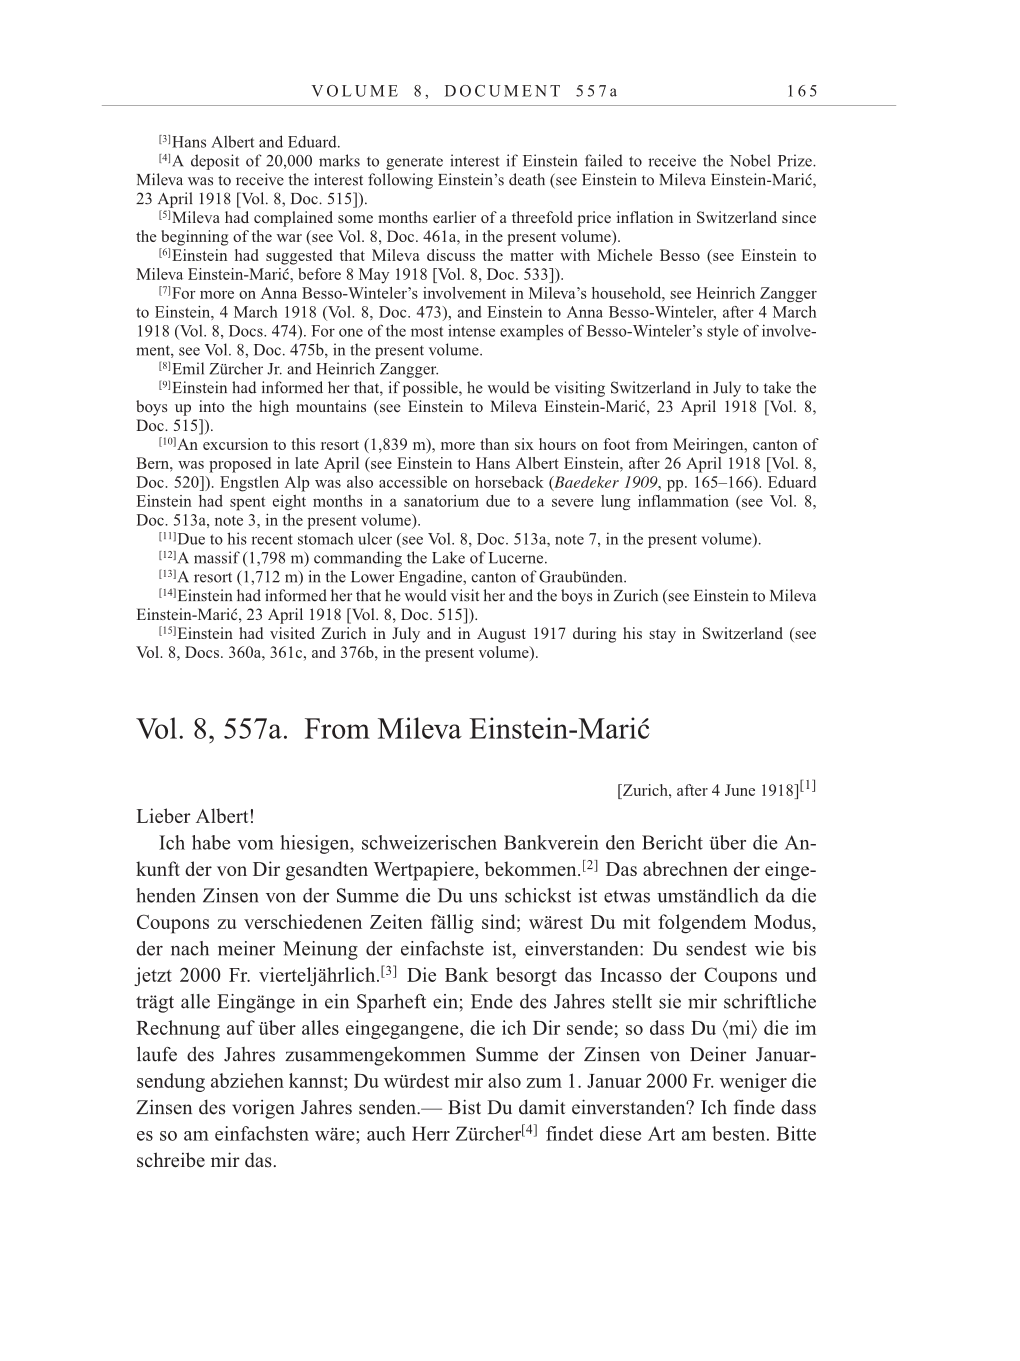 Volume 10: The Berlin Years: Correspondence May-December 1920 / Supplementary Correspondence 1909-1920 page 165